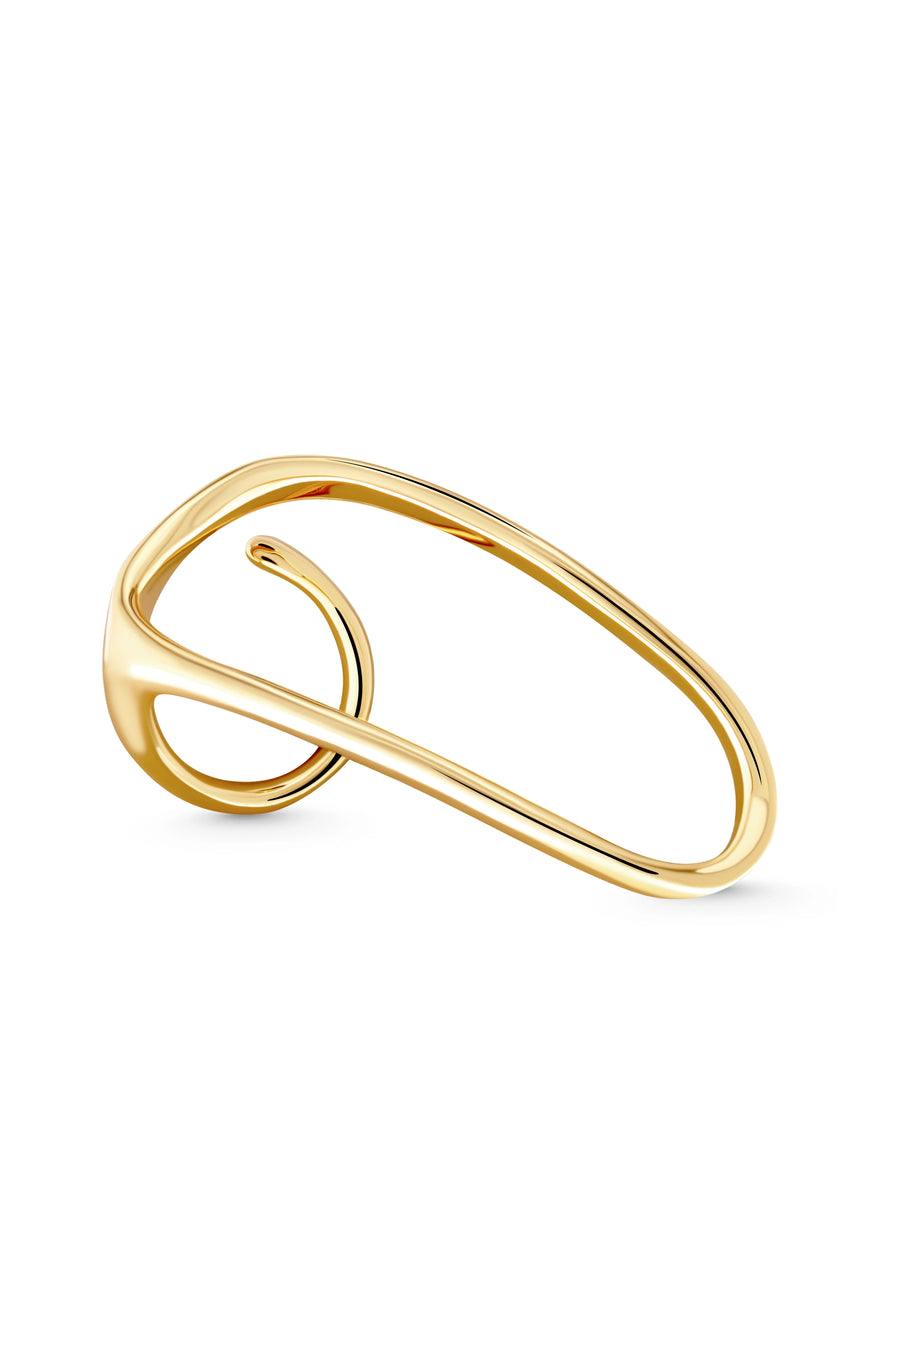 DUO Ring. Two-finger ring with oval-shaped line top, open-ended can fit with US sizes 5-7, 18K gold vermeil, handmade, hypoallergenic, water-resistant